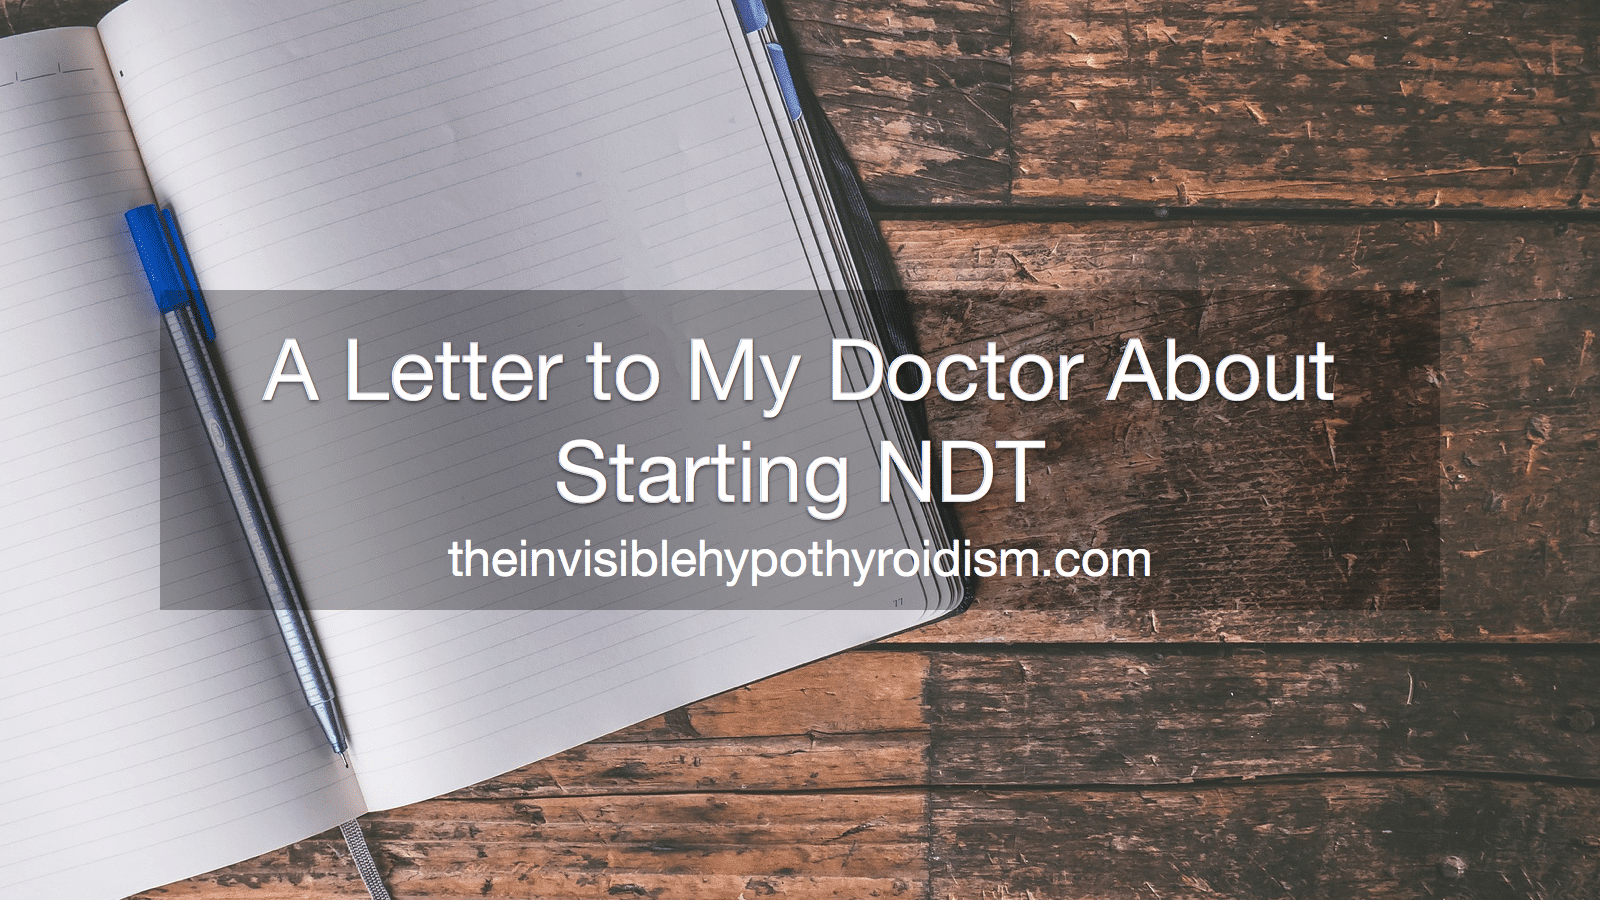 A Letter to My Doctor About NDT